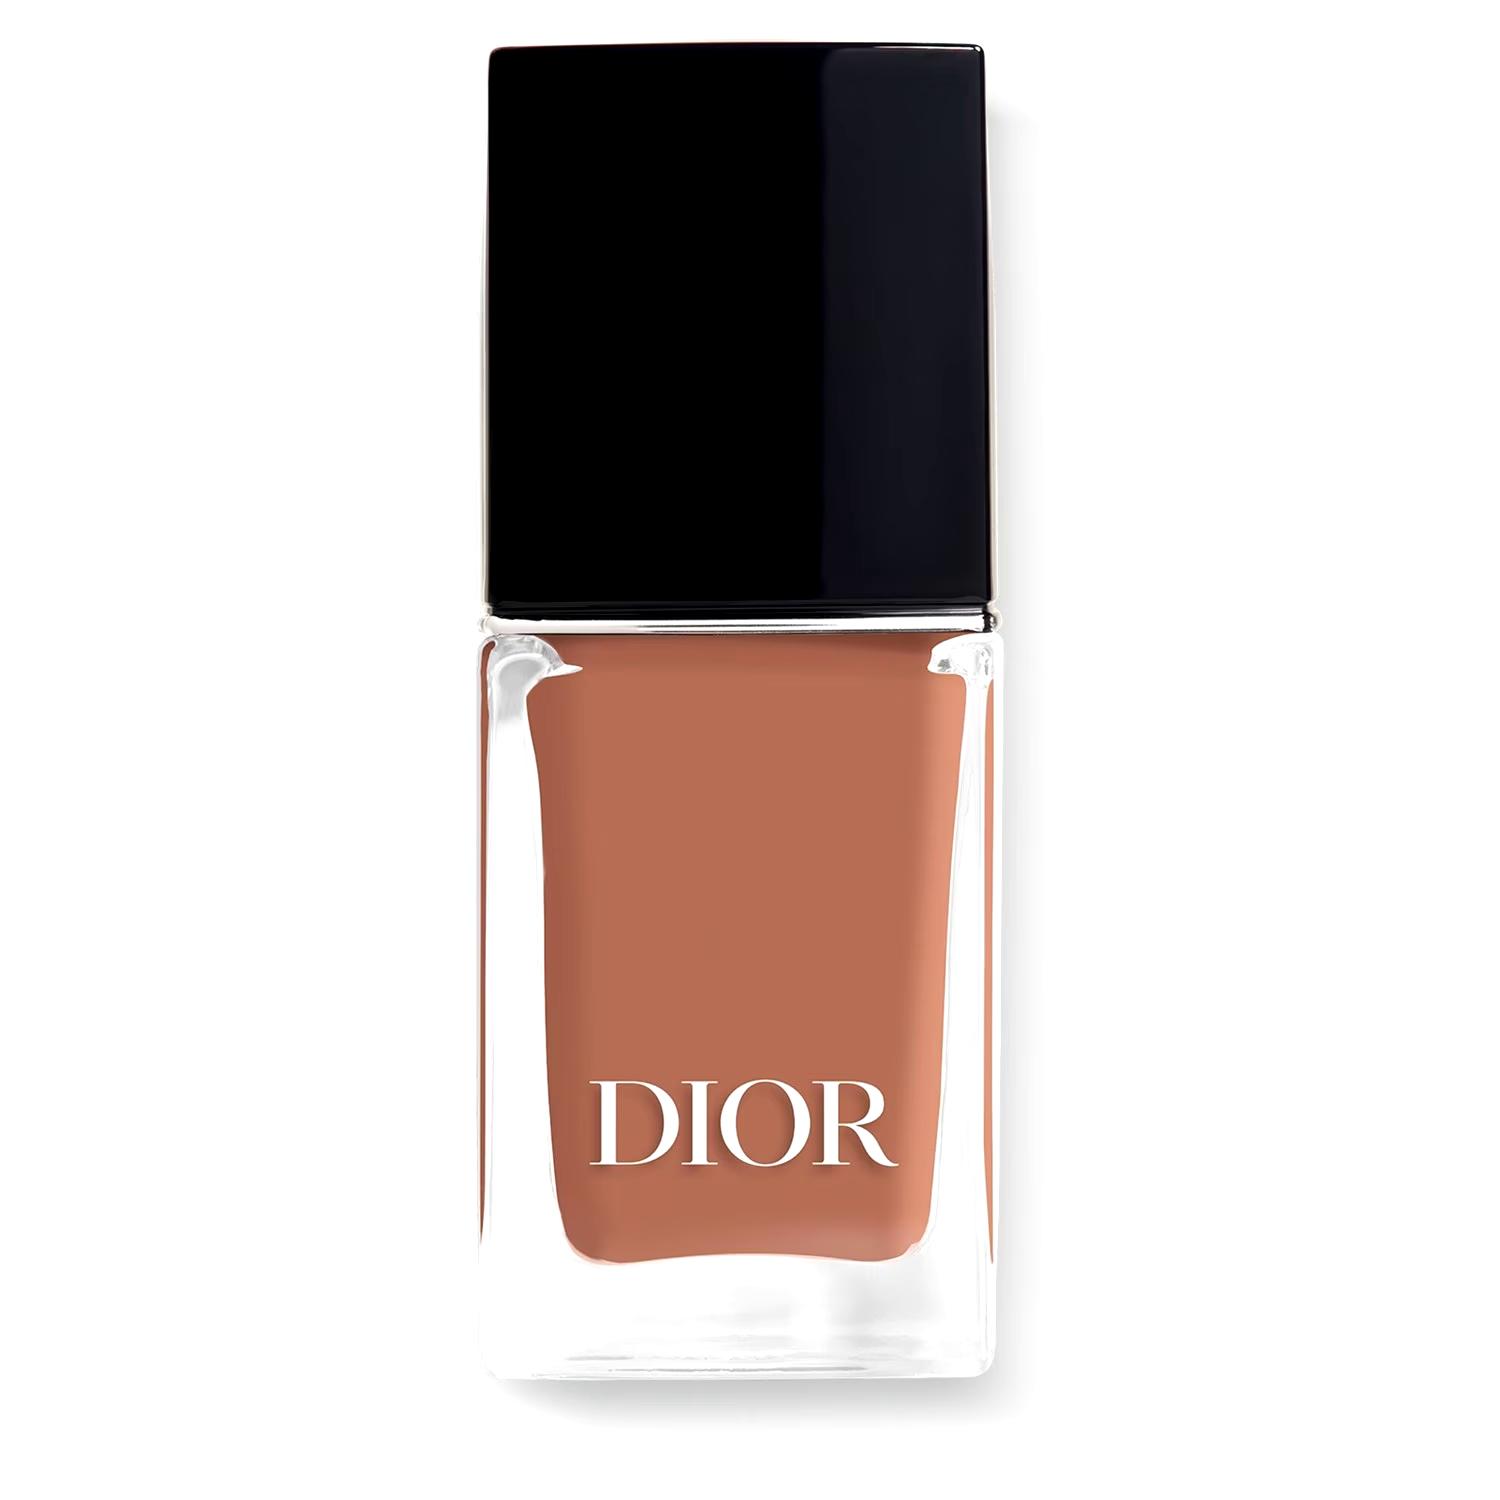 Dior vernis nail polish with gel effect and couture color